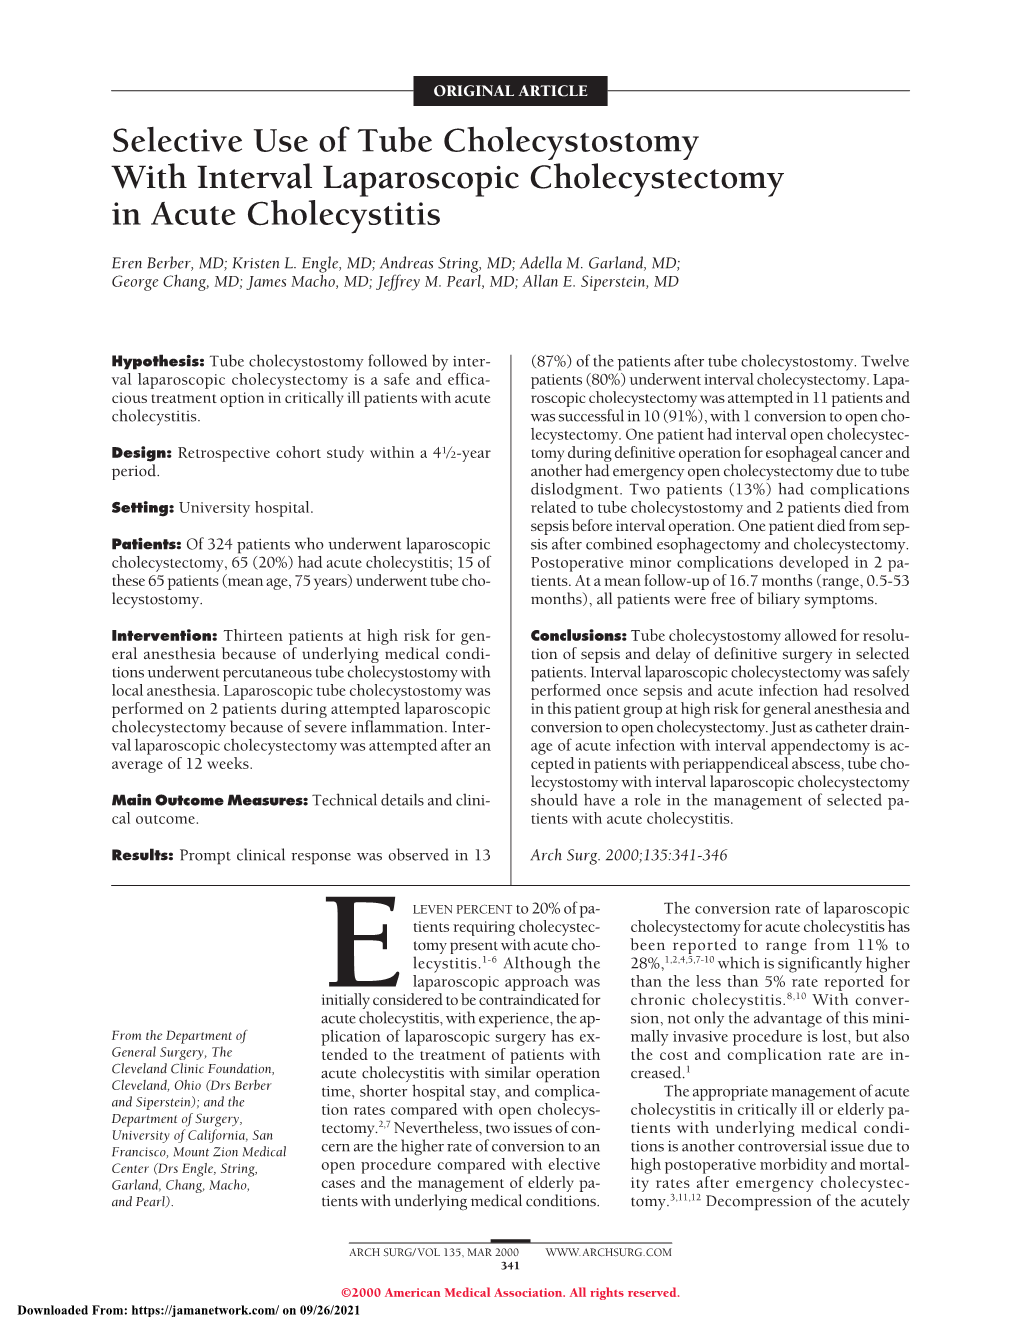 Selective Use of Tube Cholecystostomy with Interval Laparoscopic Cholecystectomy in Acute Cholecystitis